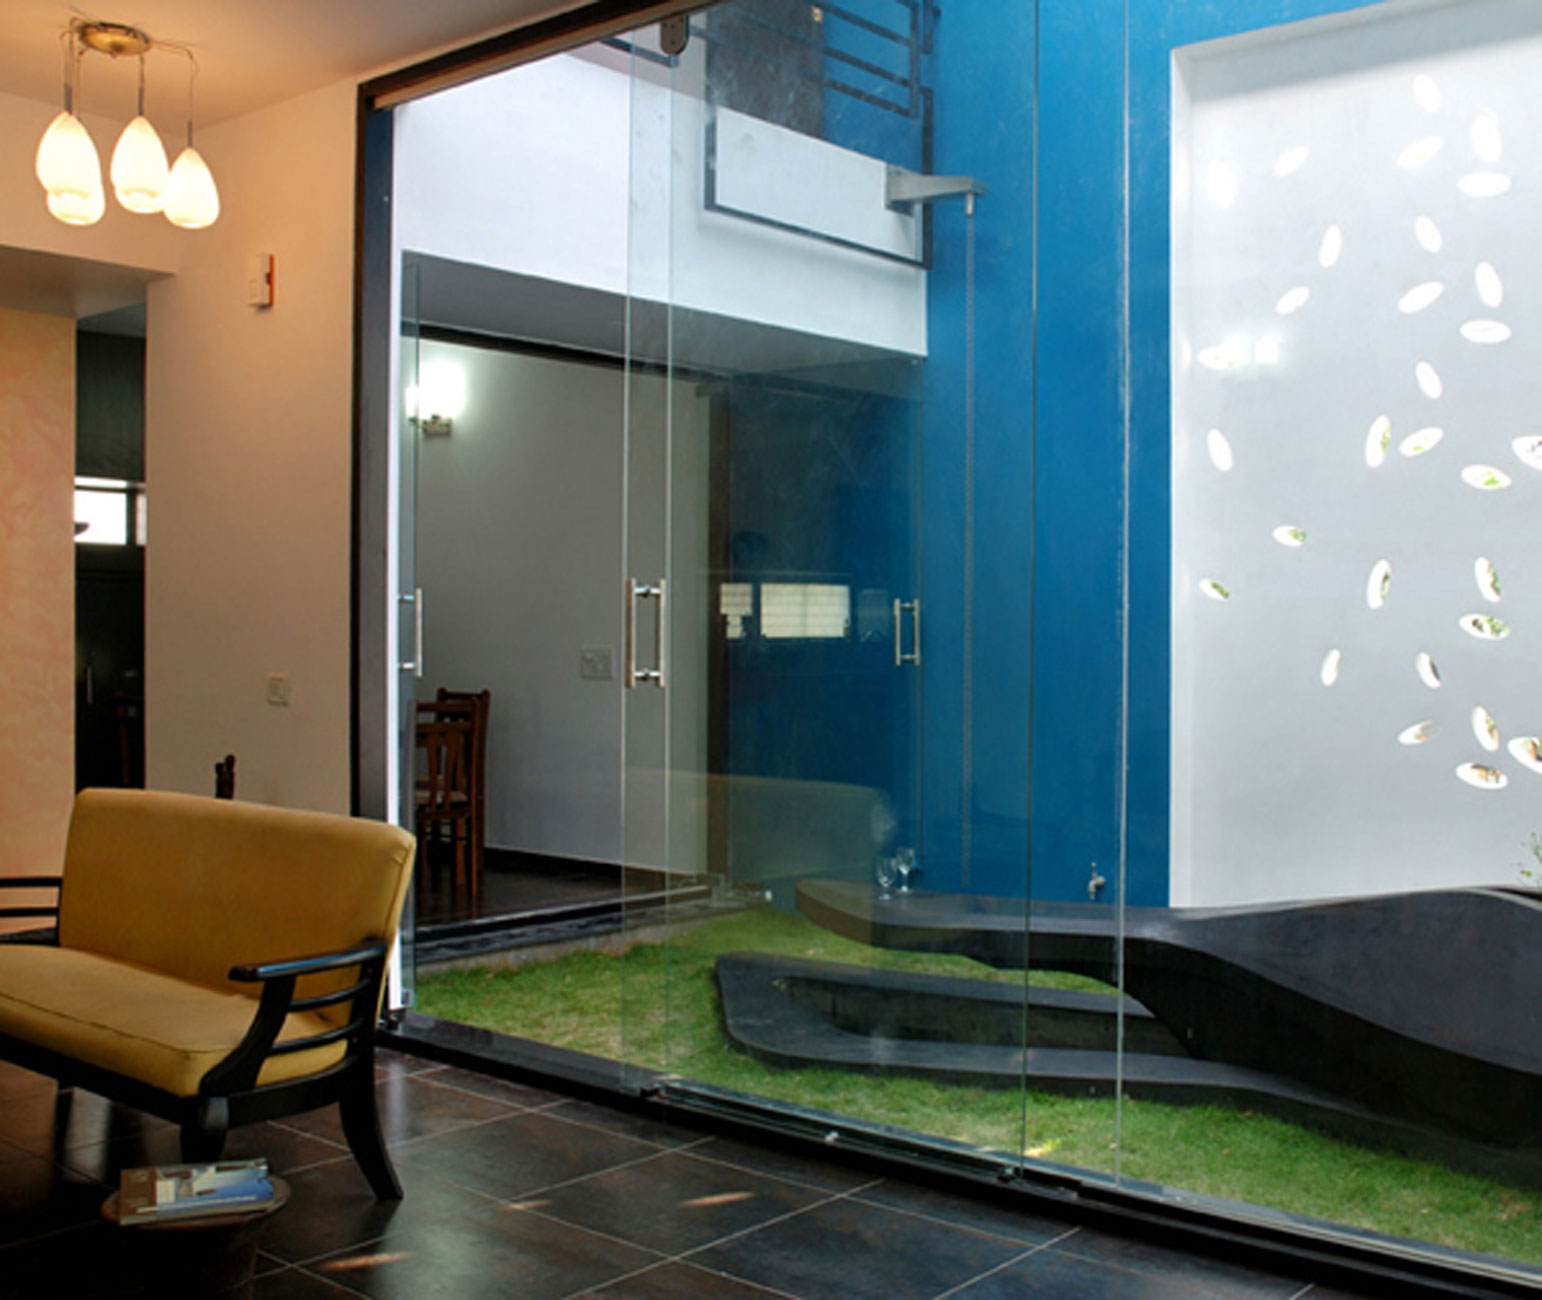 http://www.viahouse.com/wp-content/uploads/2011/02/Modern-House-Design-with-Beautiful-Wall-Details-in-India-Glass-Door.jpg